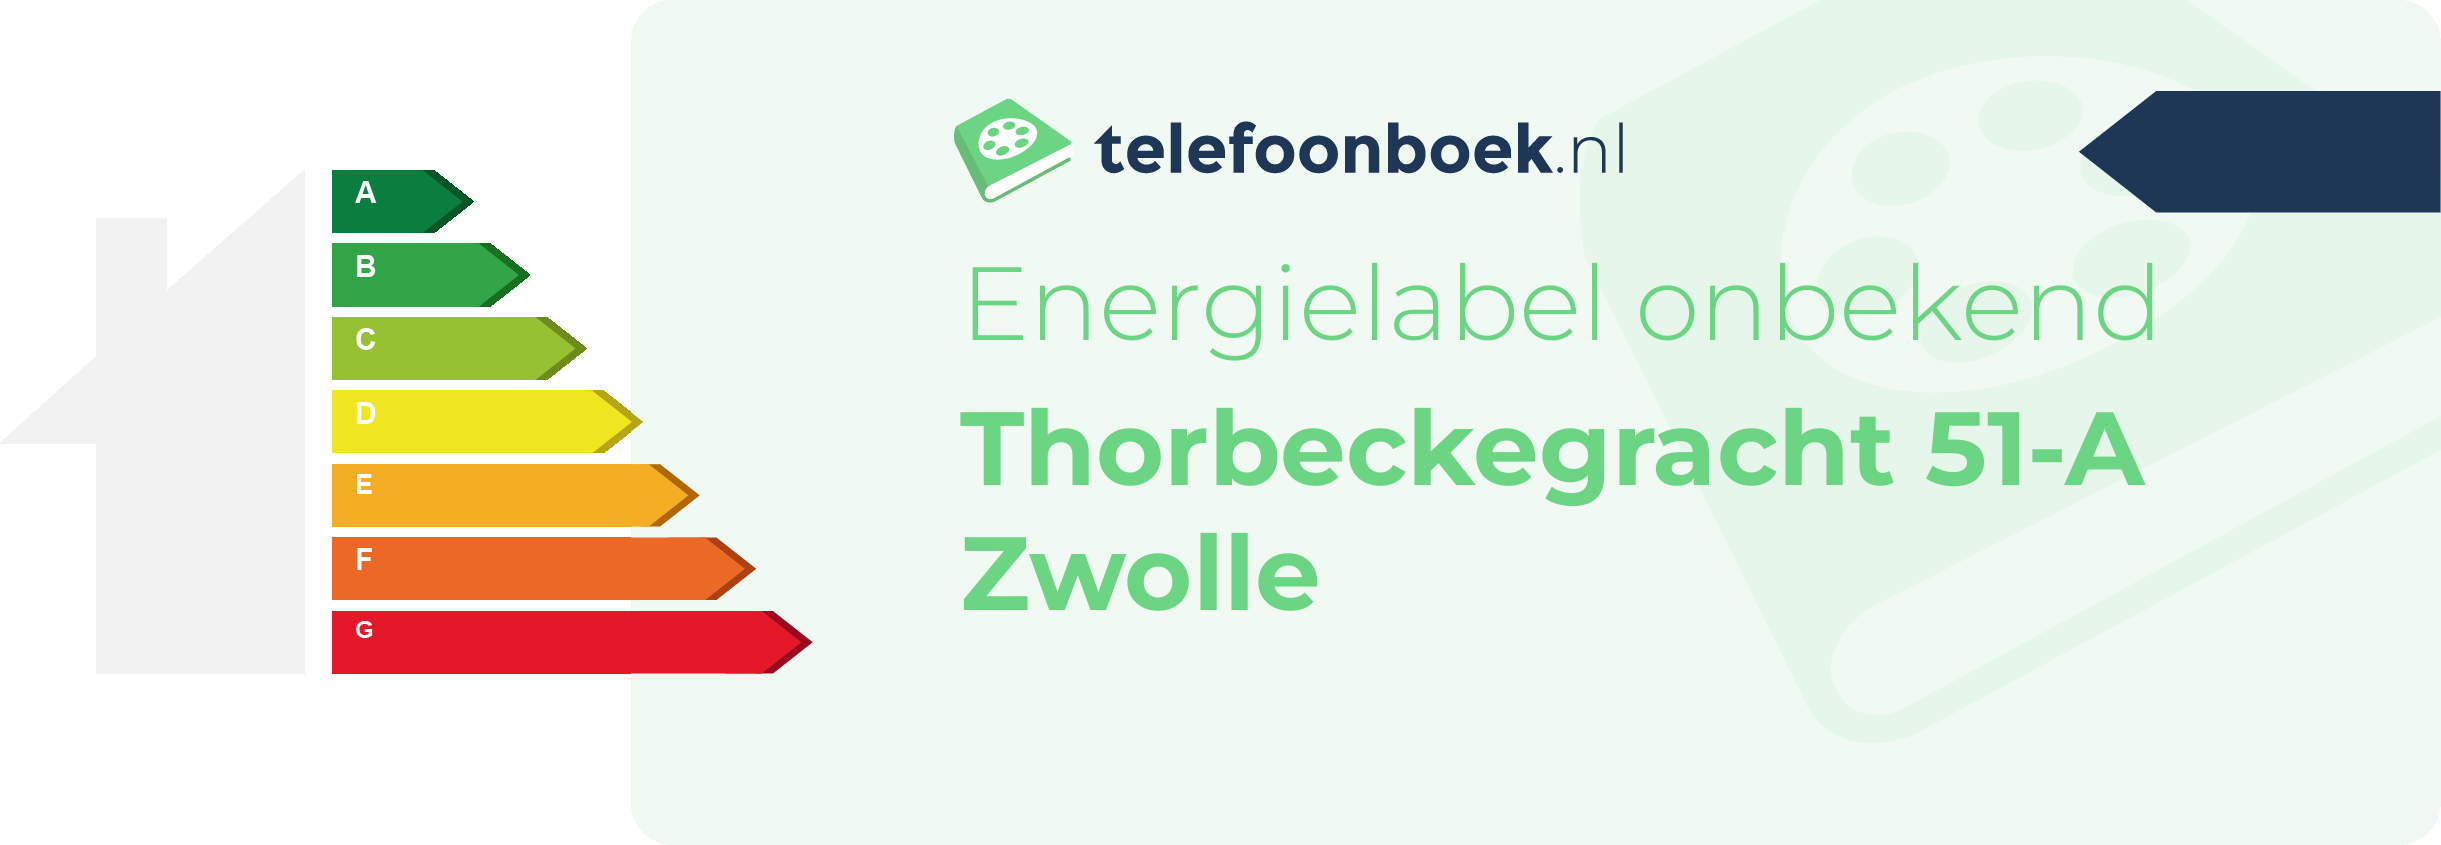 Energielabel Thorbeckegracht 51-A Zwolle